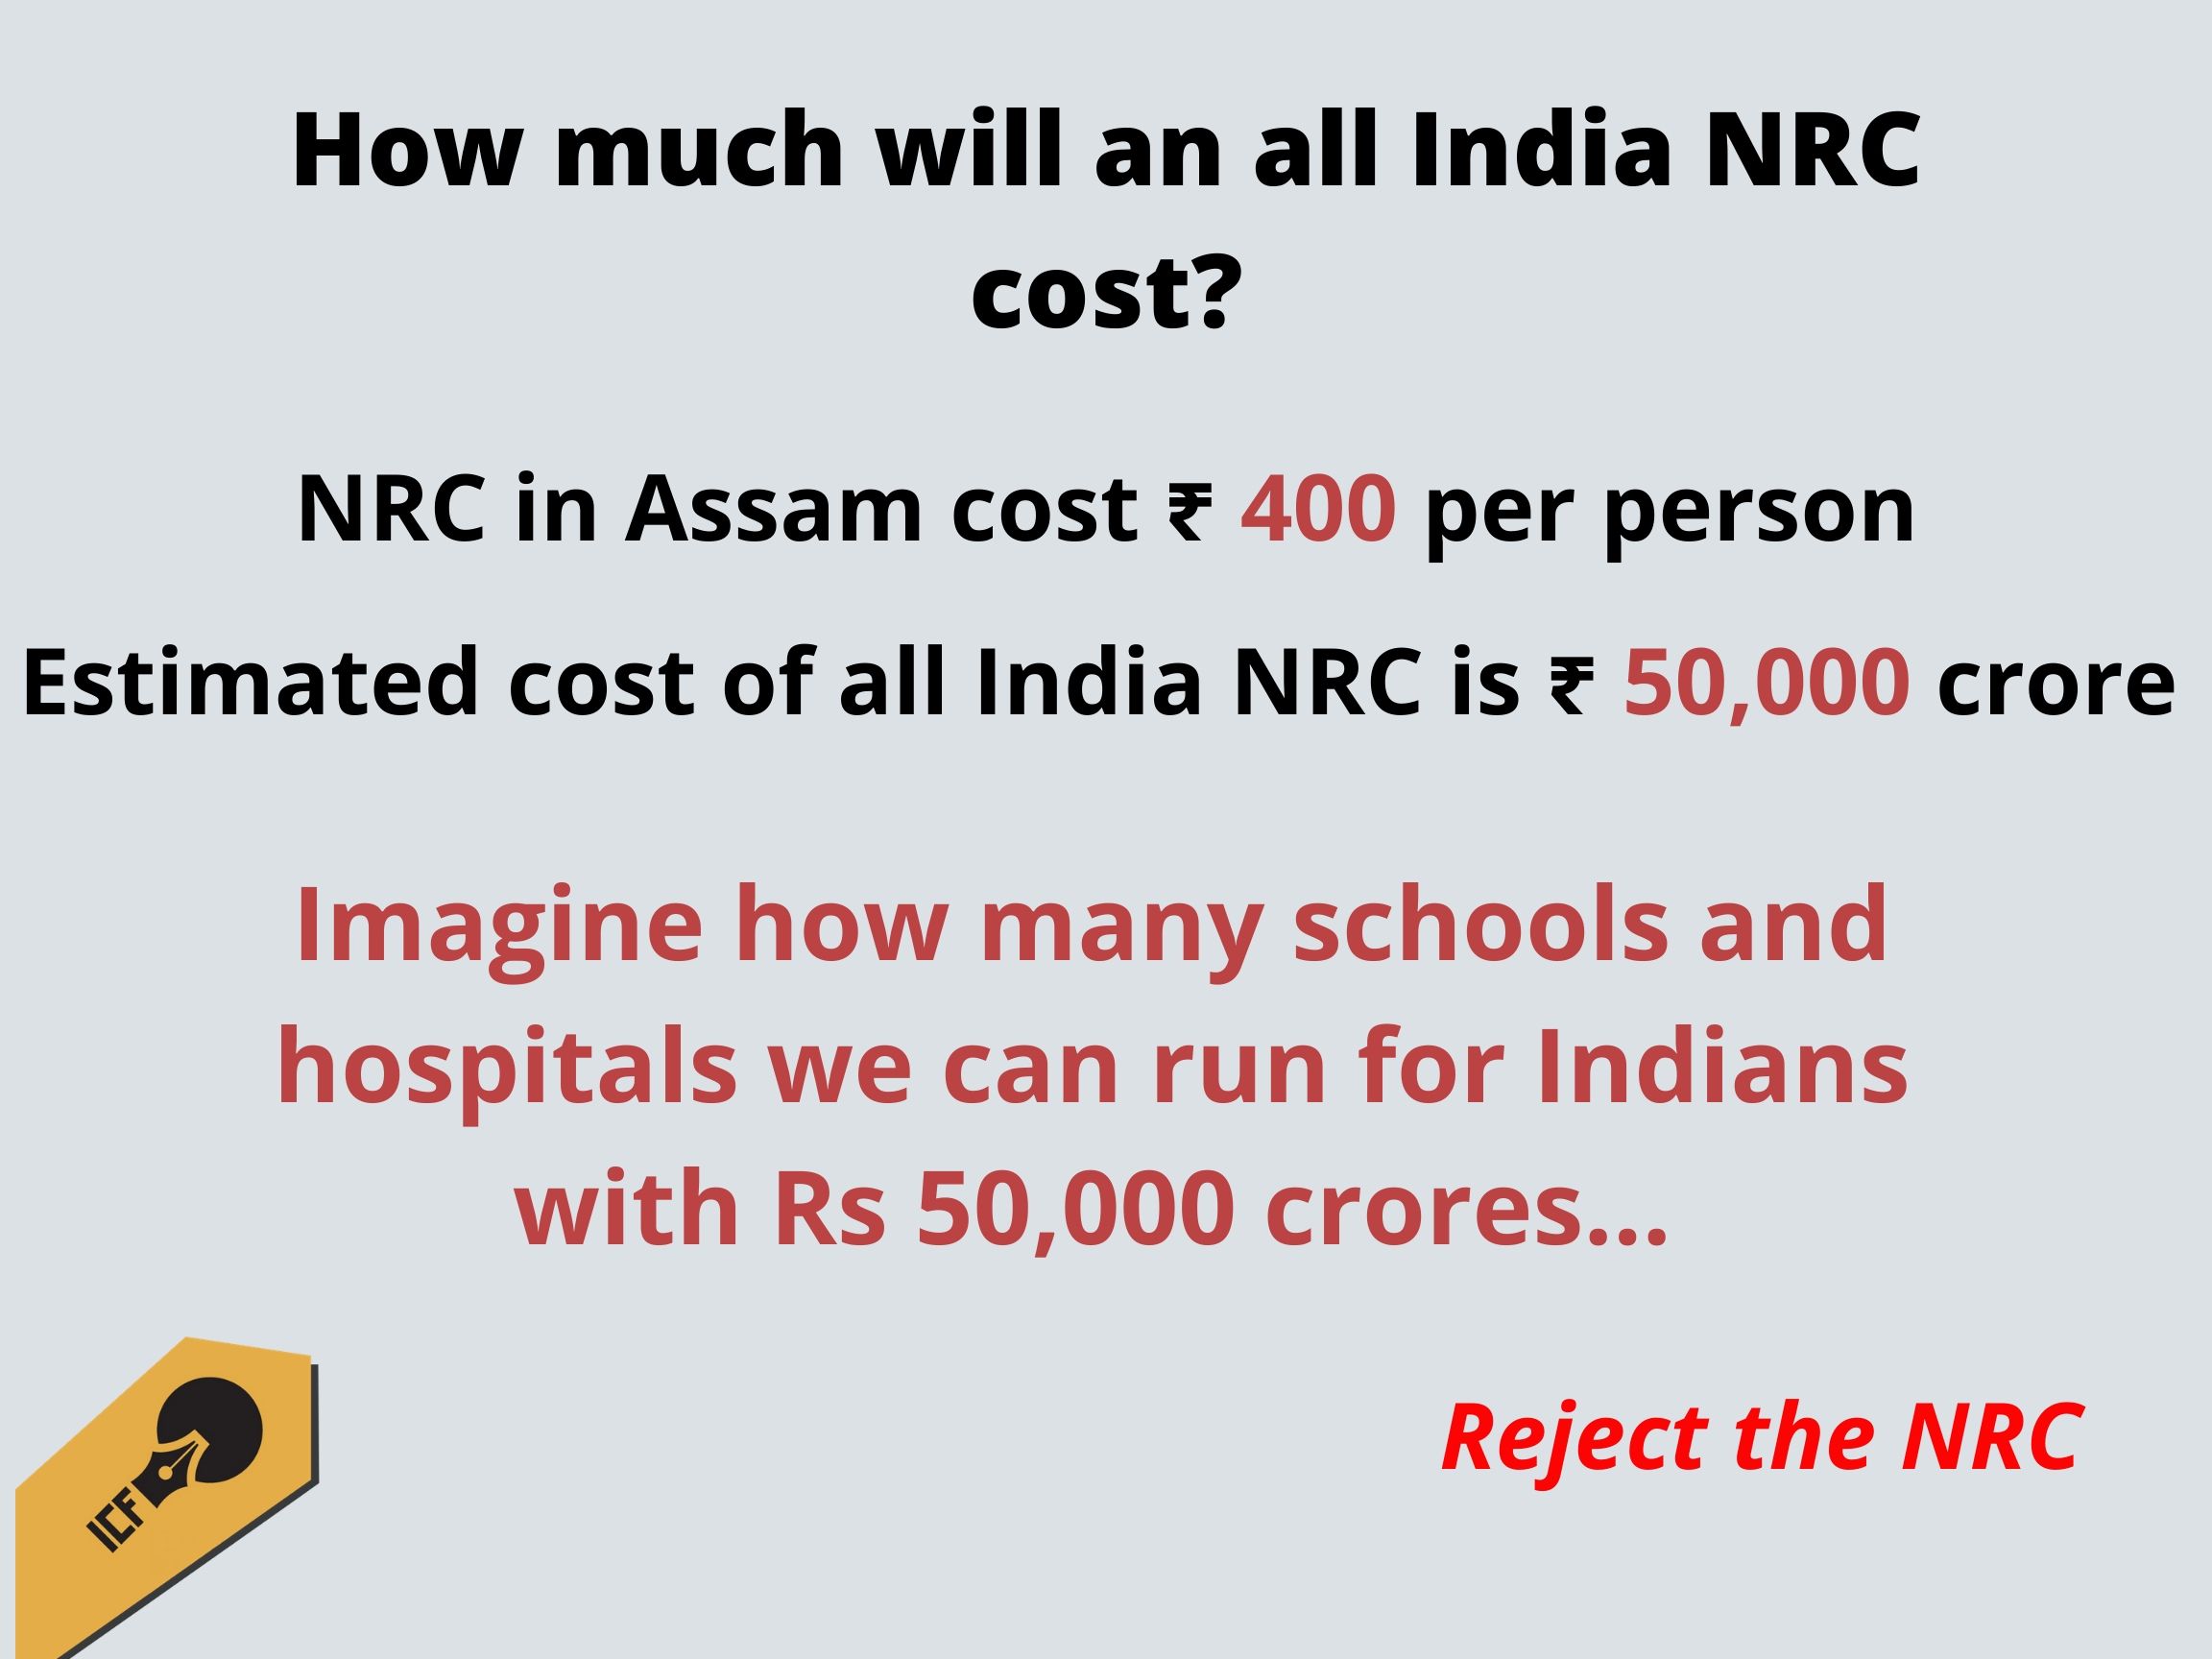 How much will an all India NRC cost?